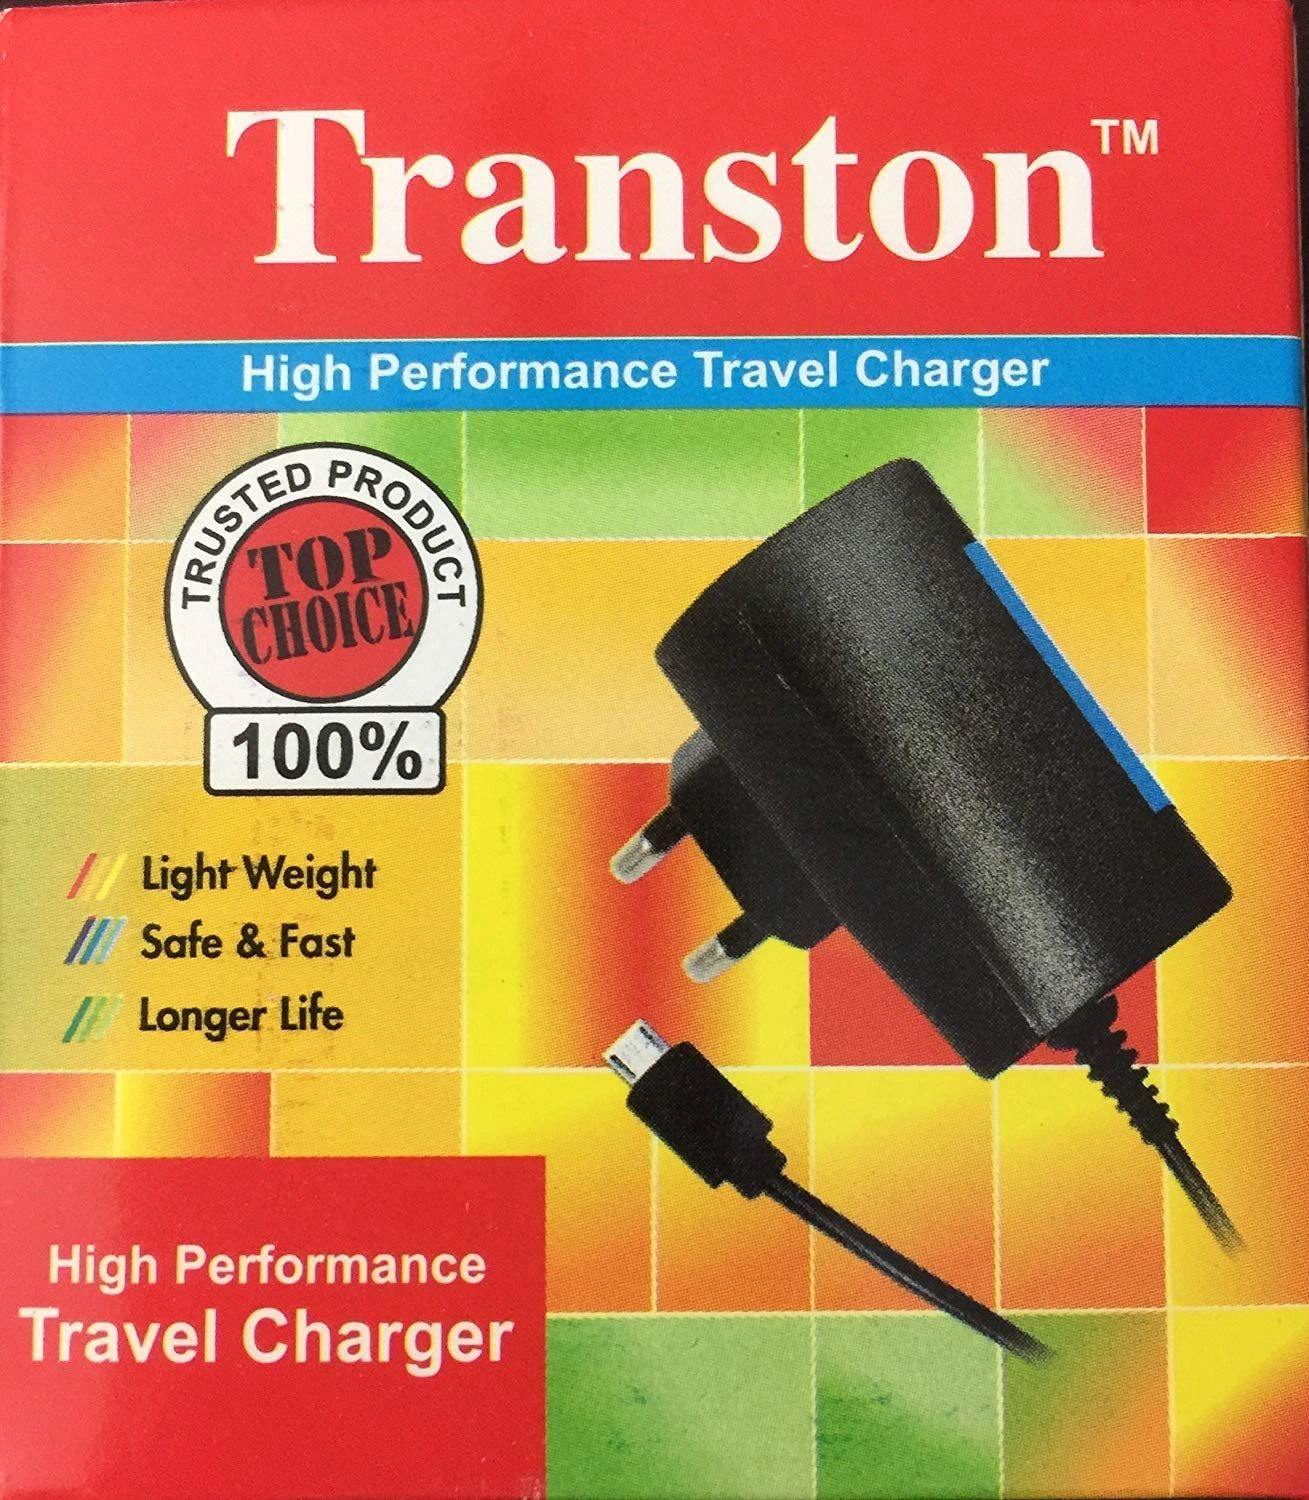 Transton Nokia Small Pin Charger for Nokia Basic Phones Premium Quality Charger-Chargers-dealsplant